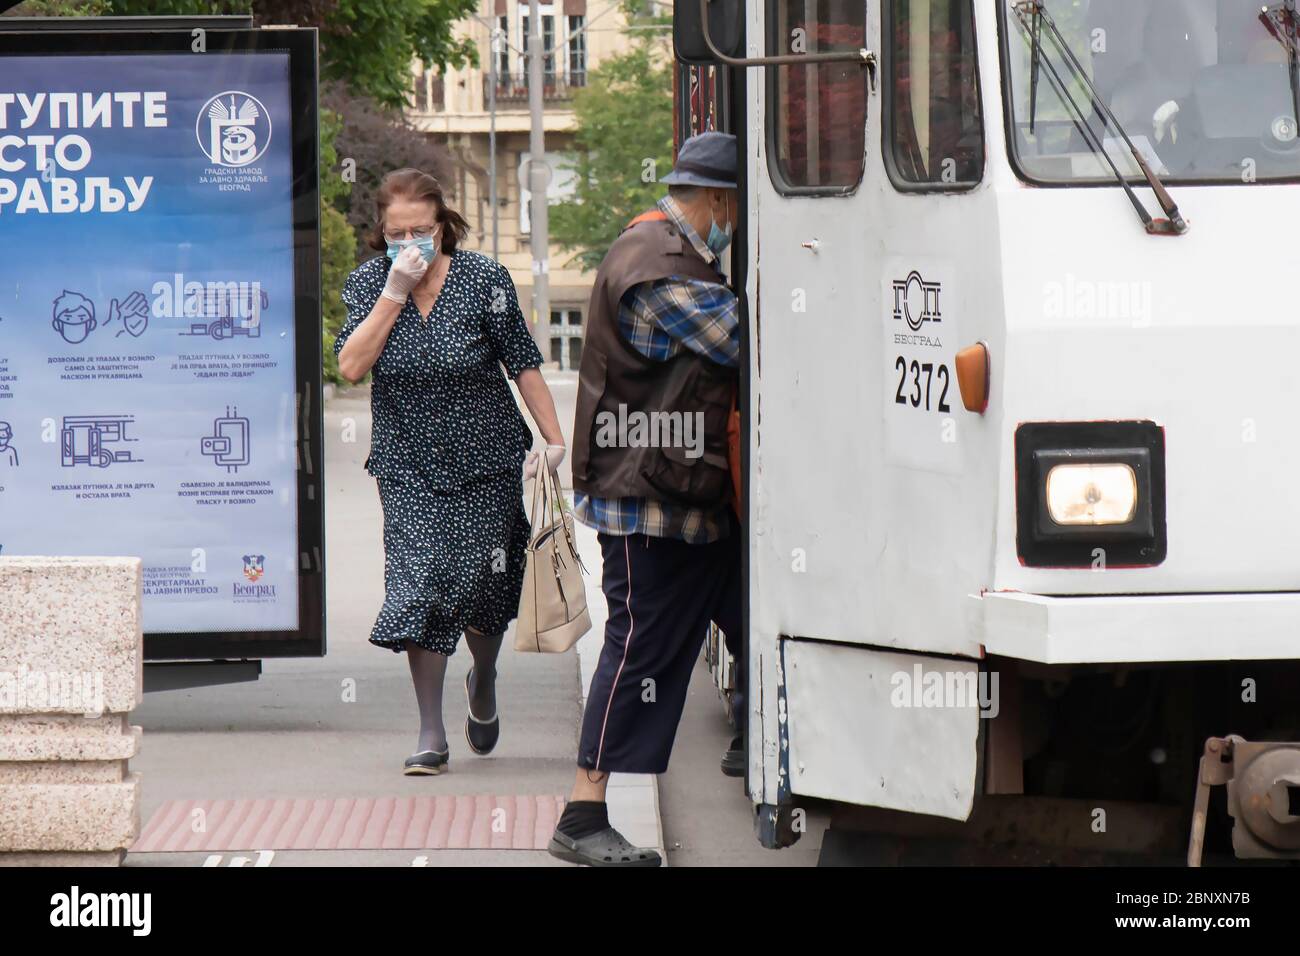 Belgrade, Serbia - May 12, 2020: Elder people wearing face surgical masks and gloves getting in the public transportation Stock Photo